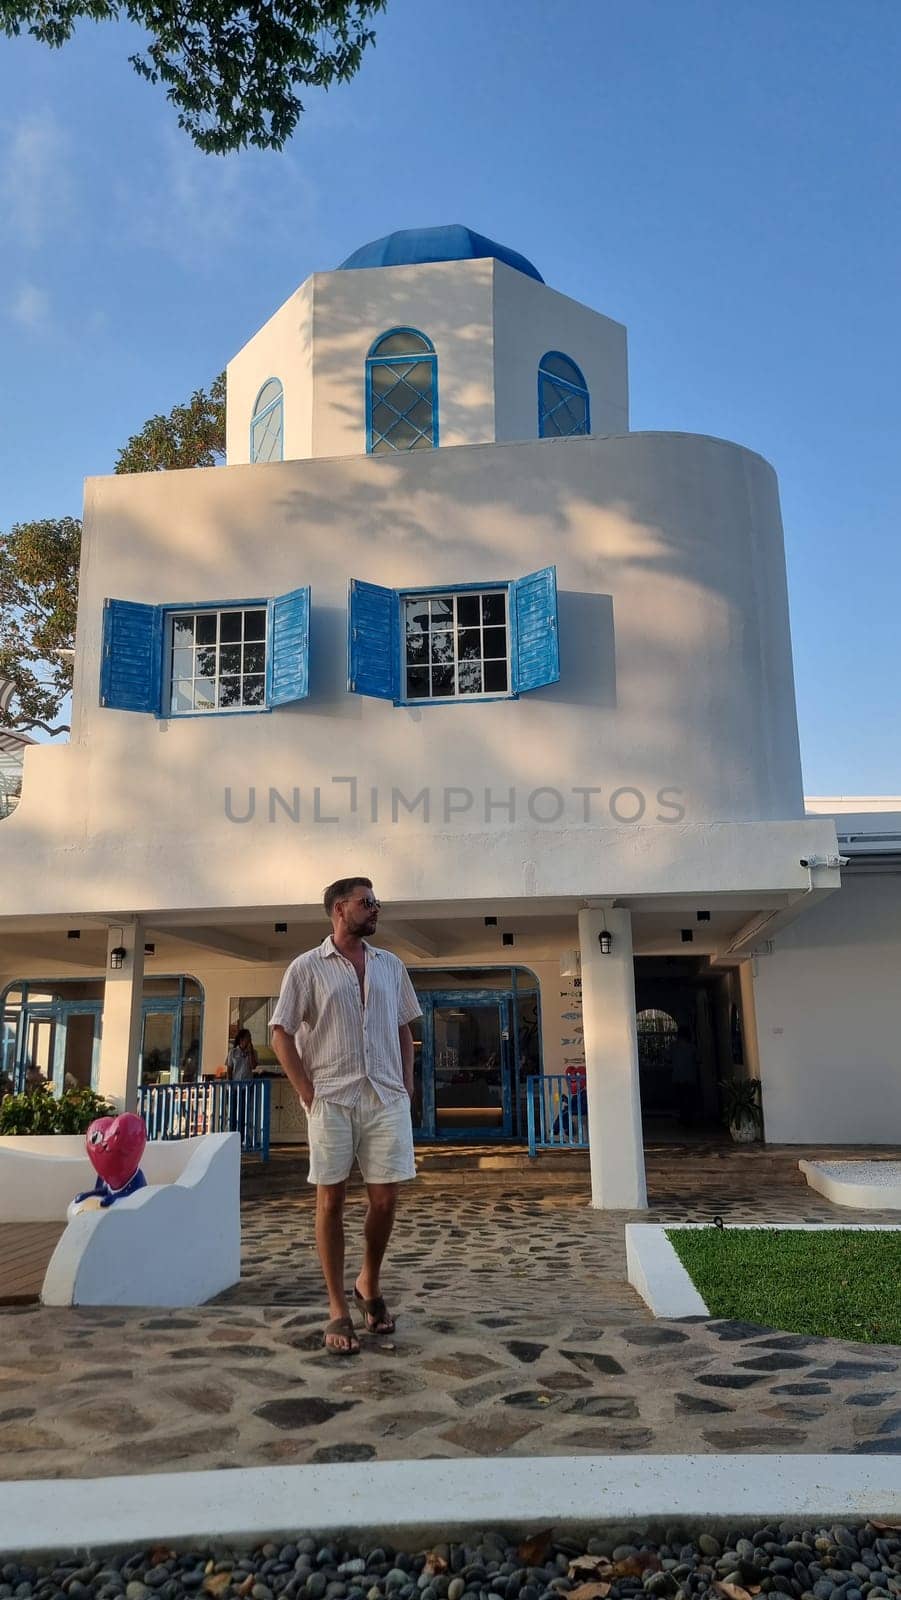 Bangsaray Pattaya Thailand 28 February 2024,A man in casual attire stands confidently in front of a majestic white building, the sunlight casting a warm glow over the scene.